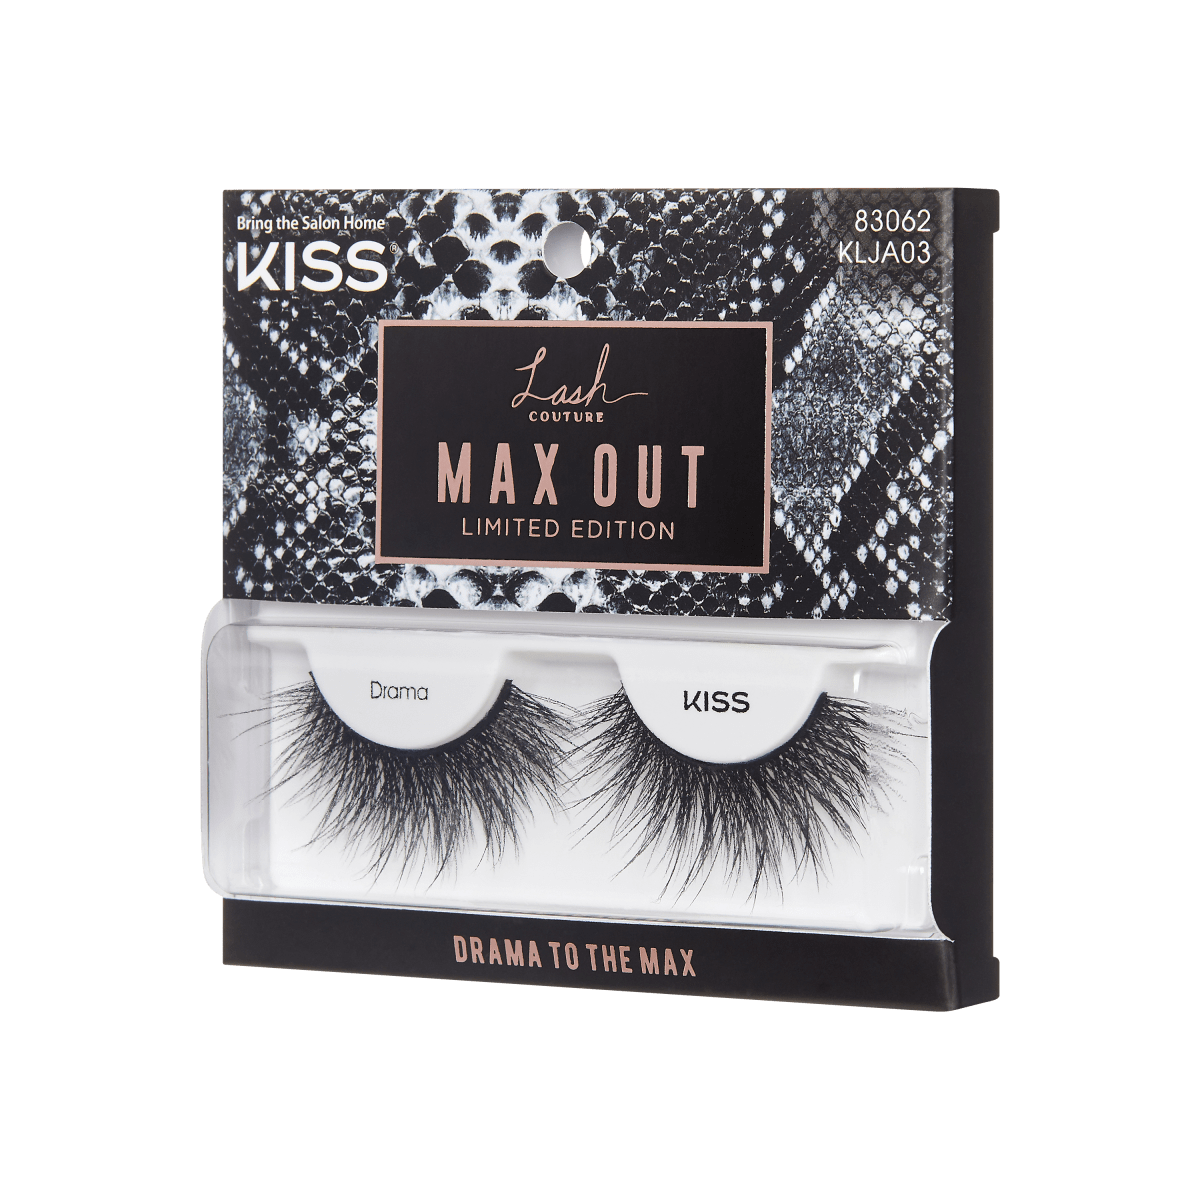 KISS Lash Couture MAX OUT - Drama to the Max